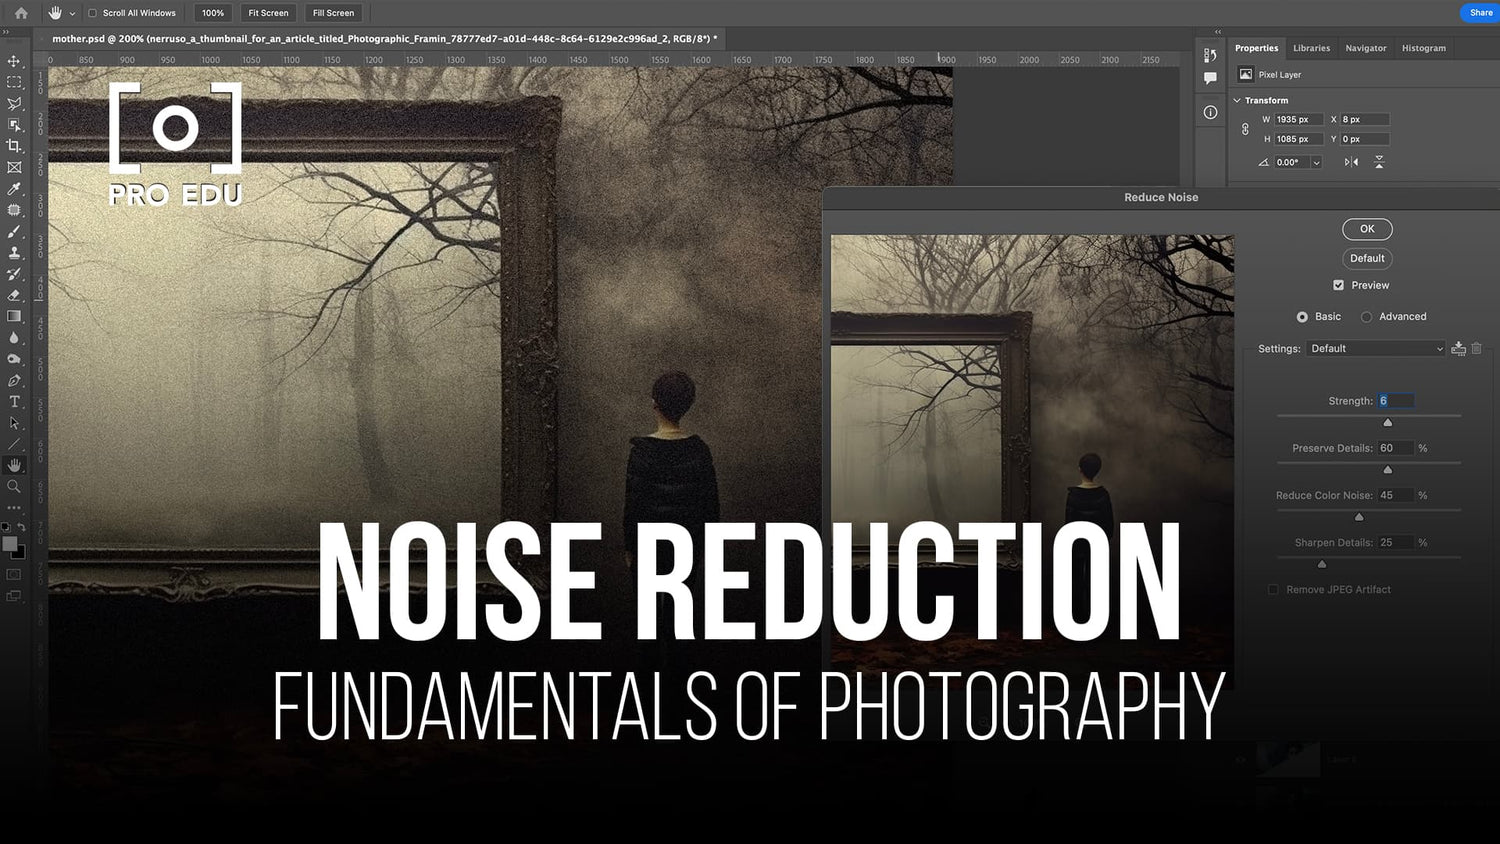 A beginner's guide to noise reduction techniques in photography